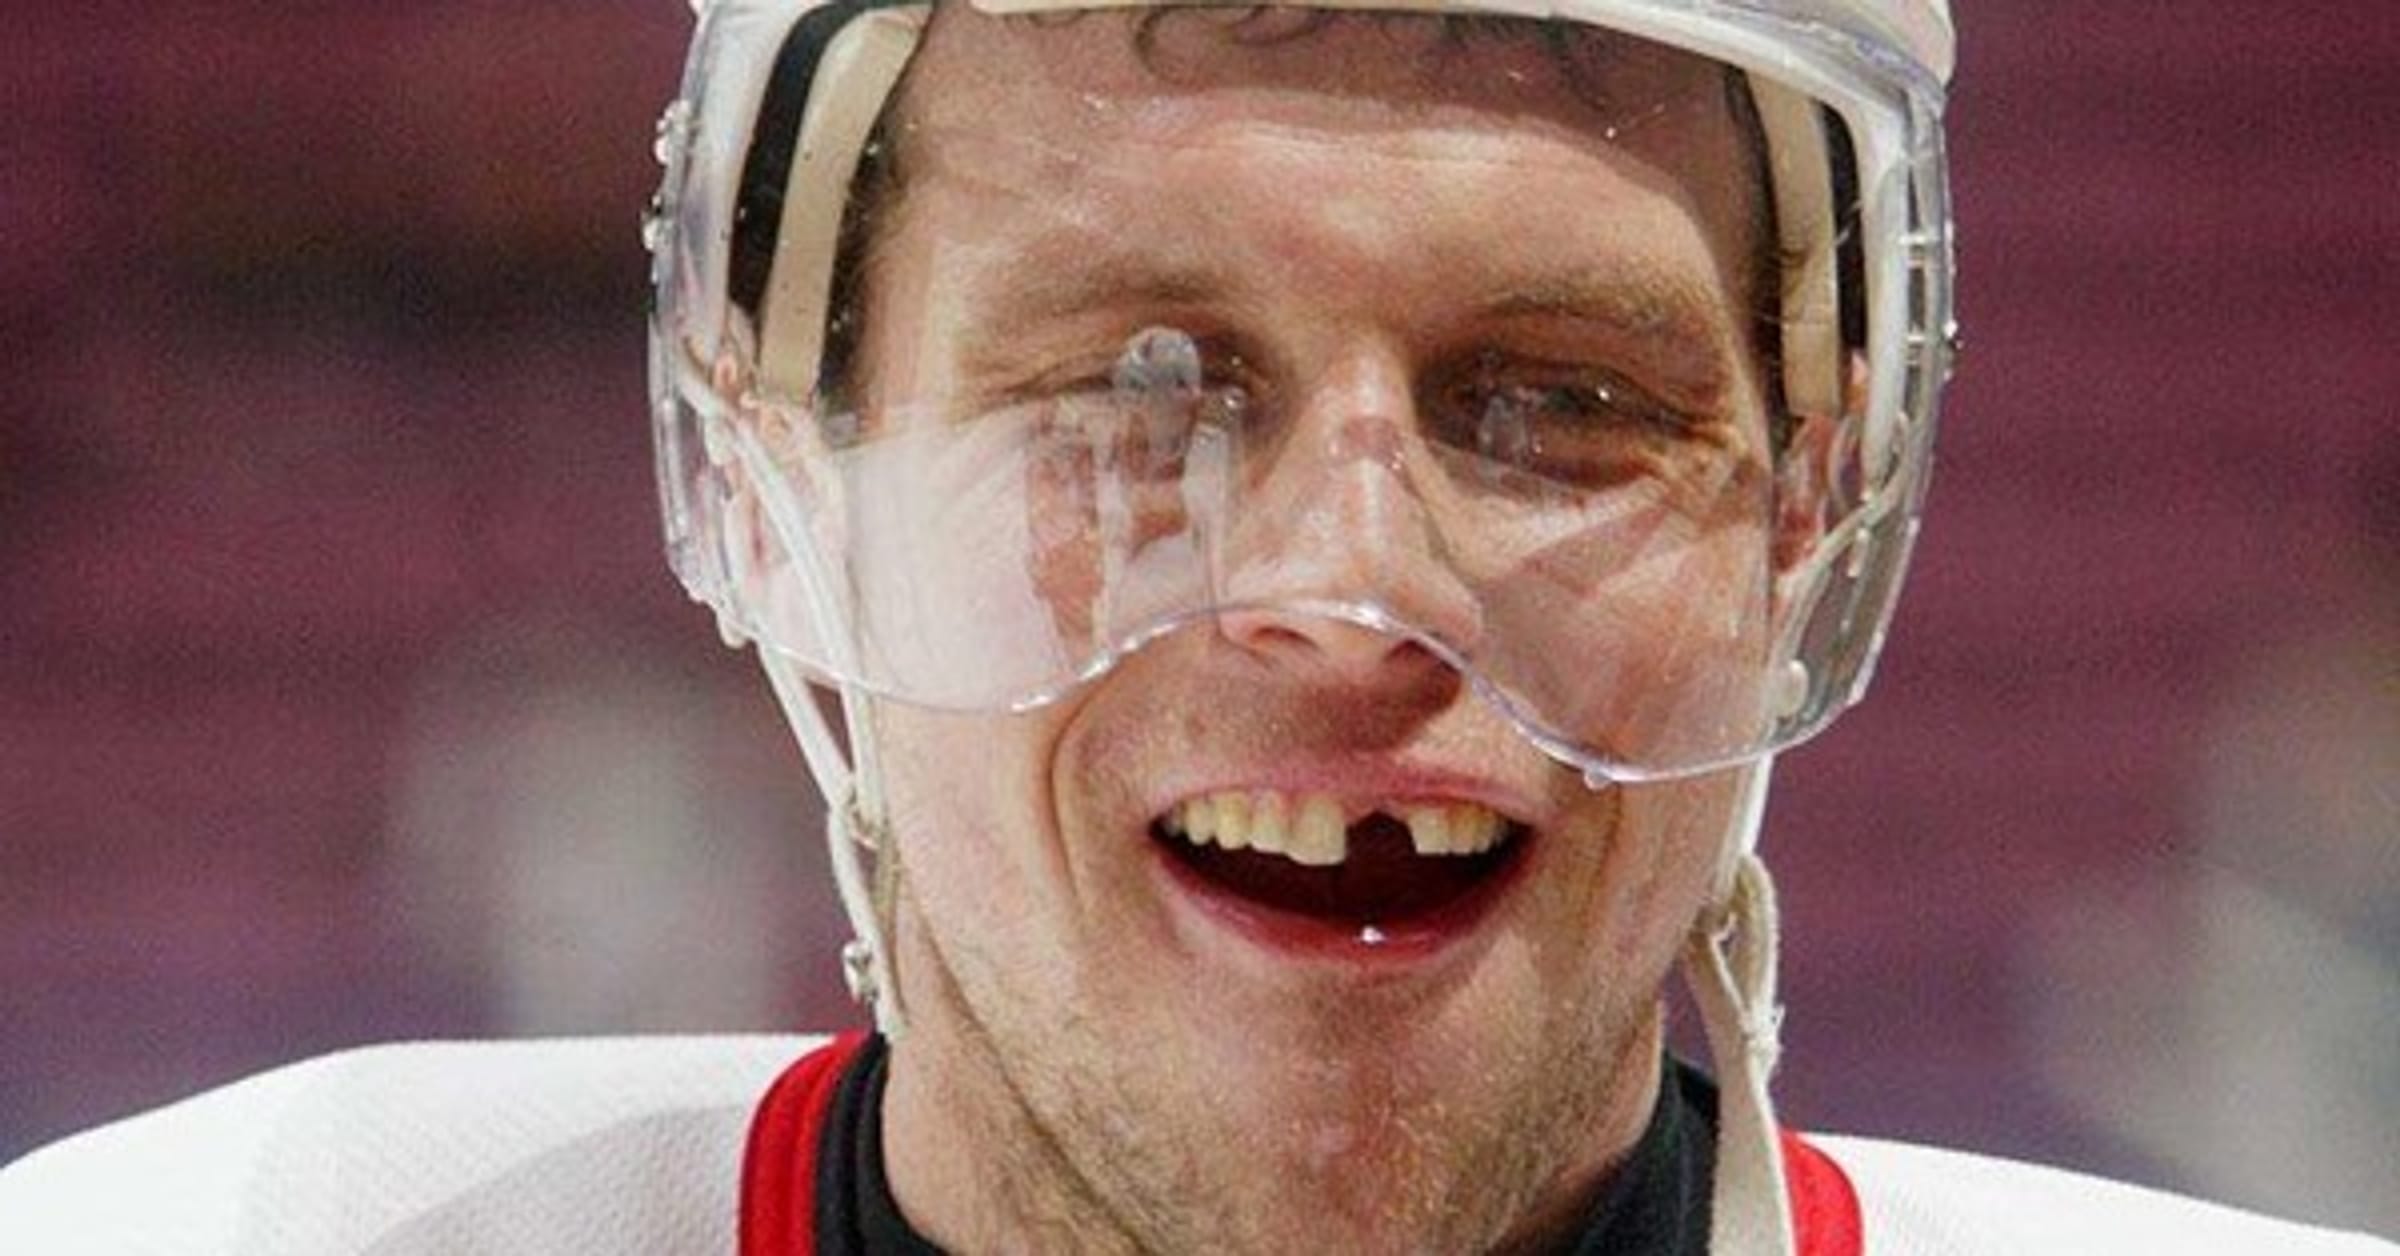 11 Hockey Players Who Lost Their Teeth Playing The Game They Love